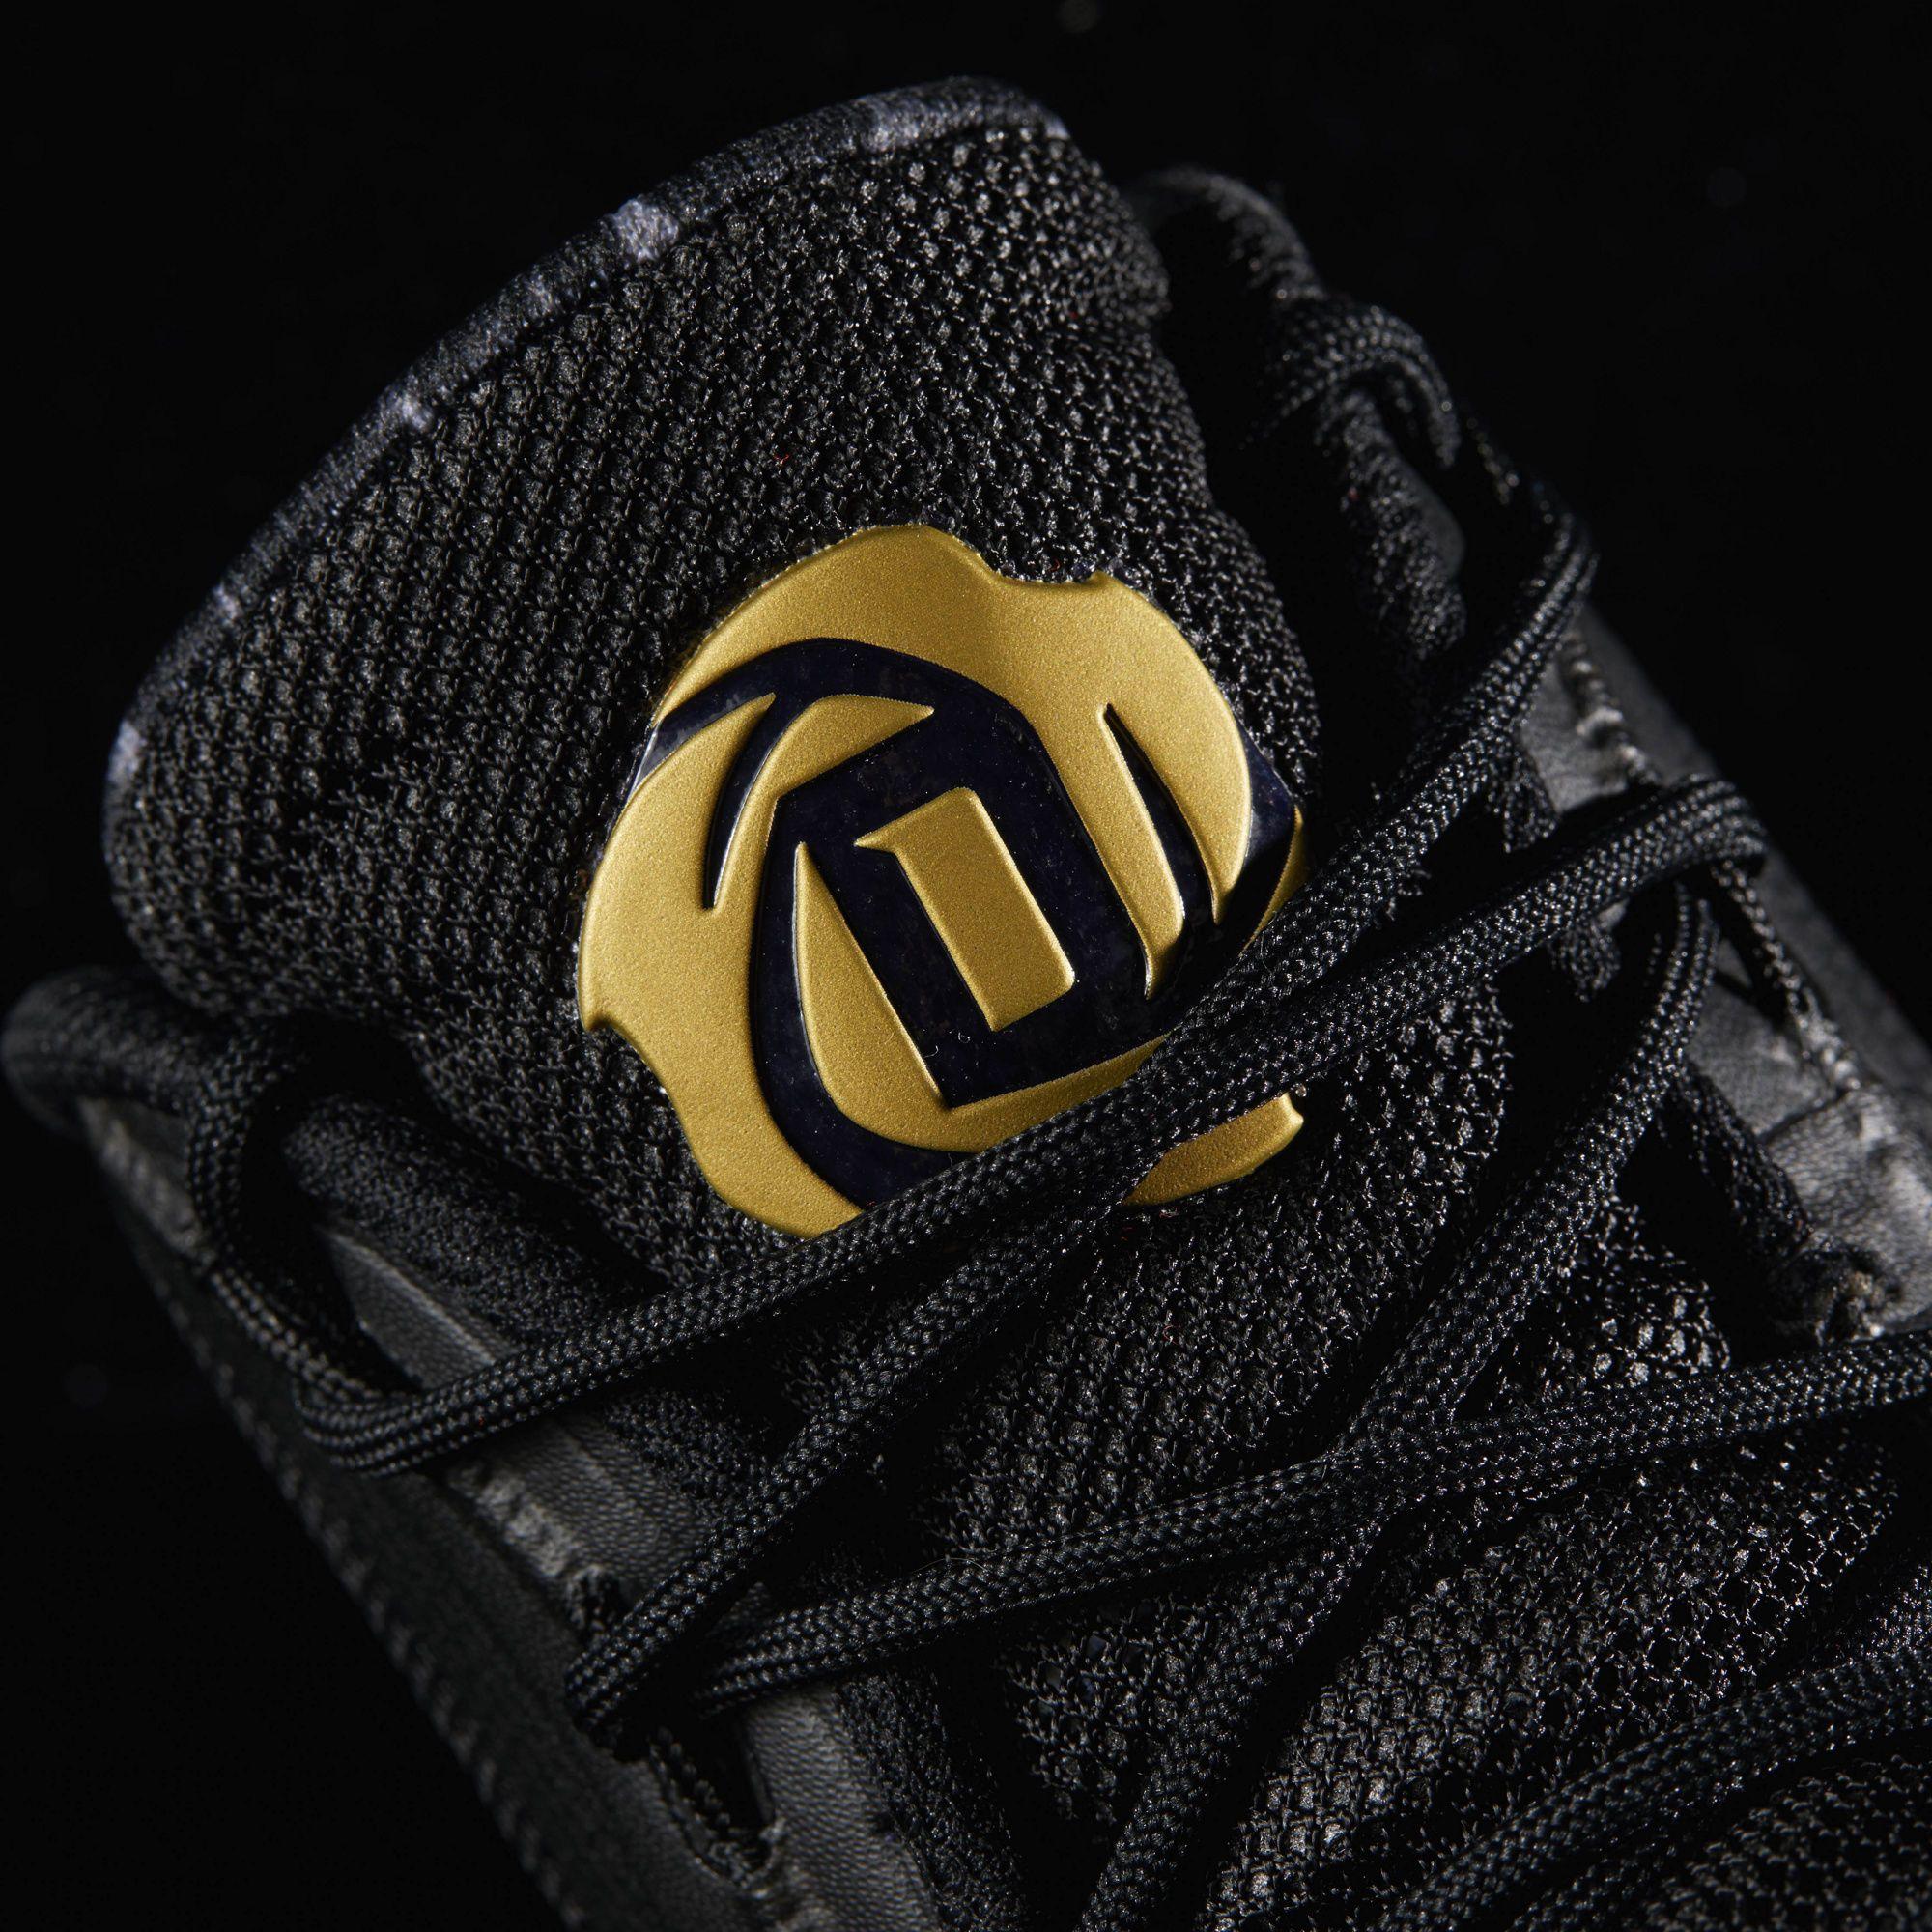 Black and Gold D Logo - Best Sale Discounted Adidas Core Black Gold Metallic Footwear White